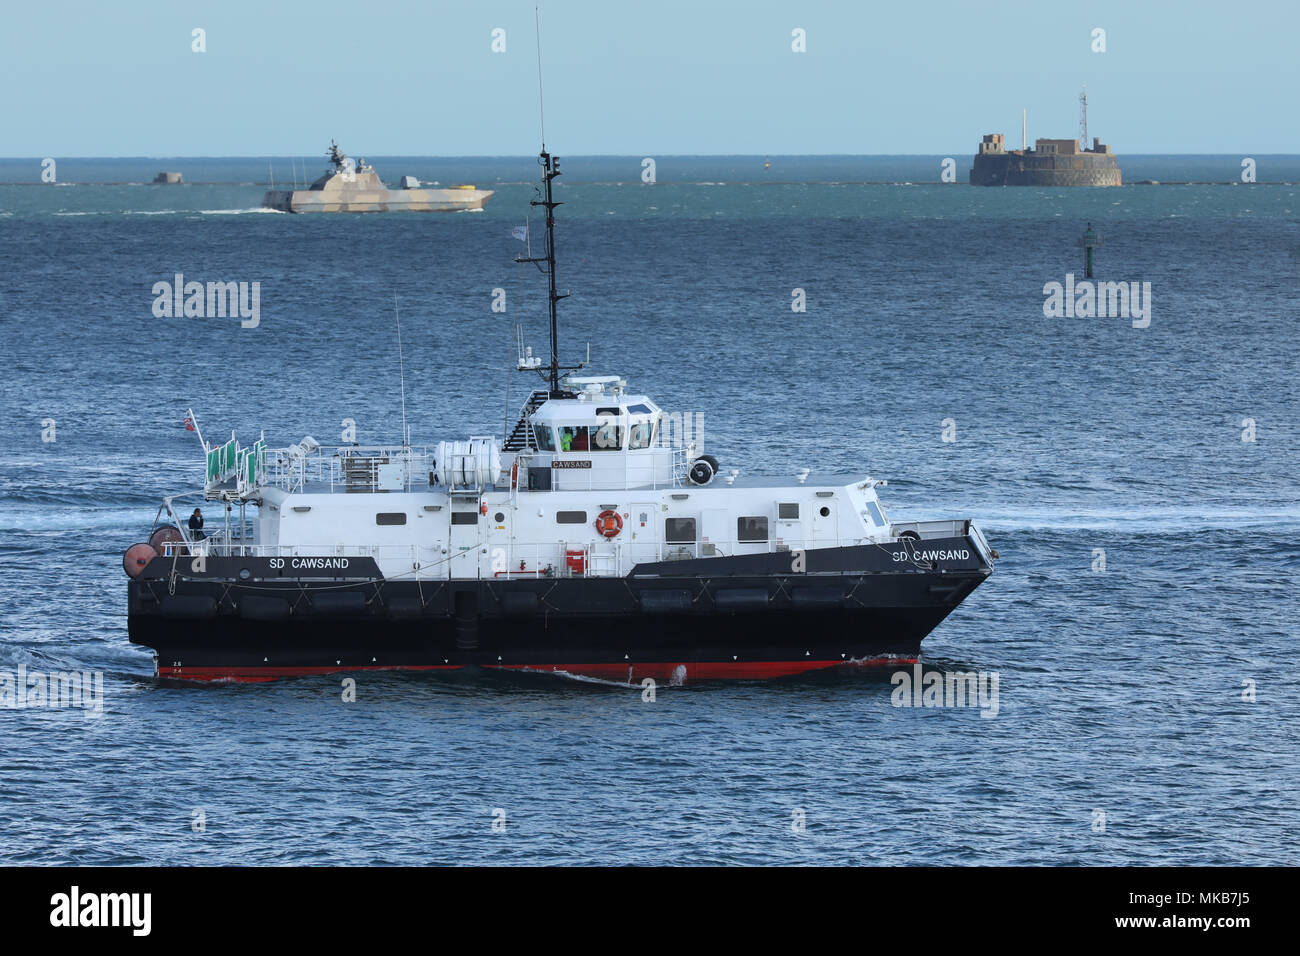 Serco Denholm tender SD Cawsand in Plymouth Sound Stock Photo